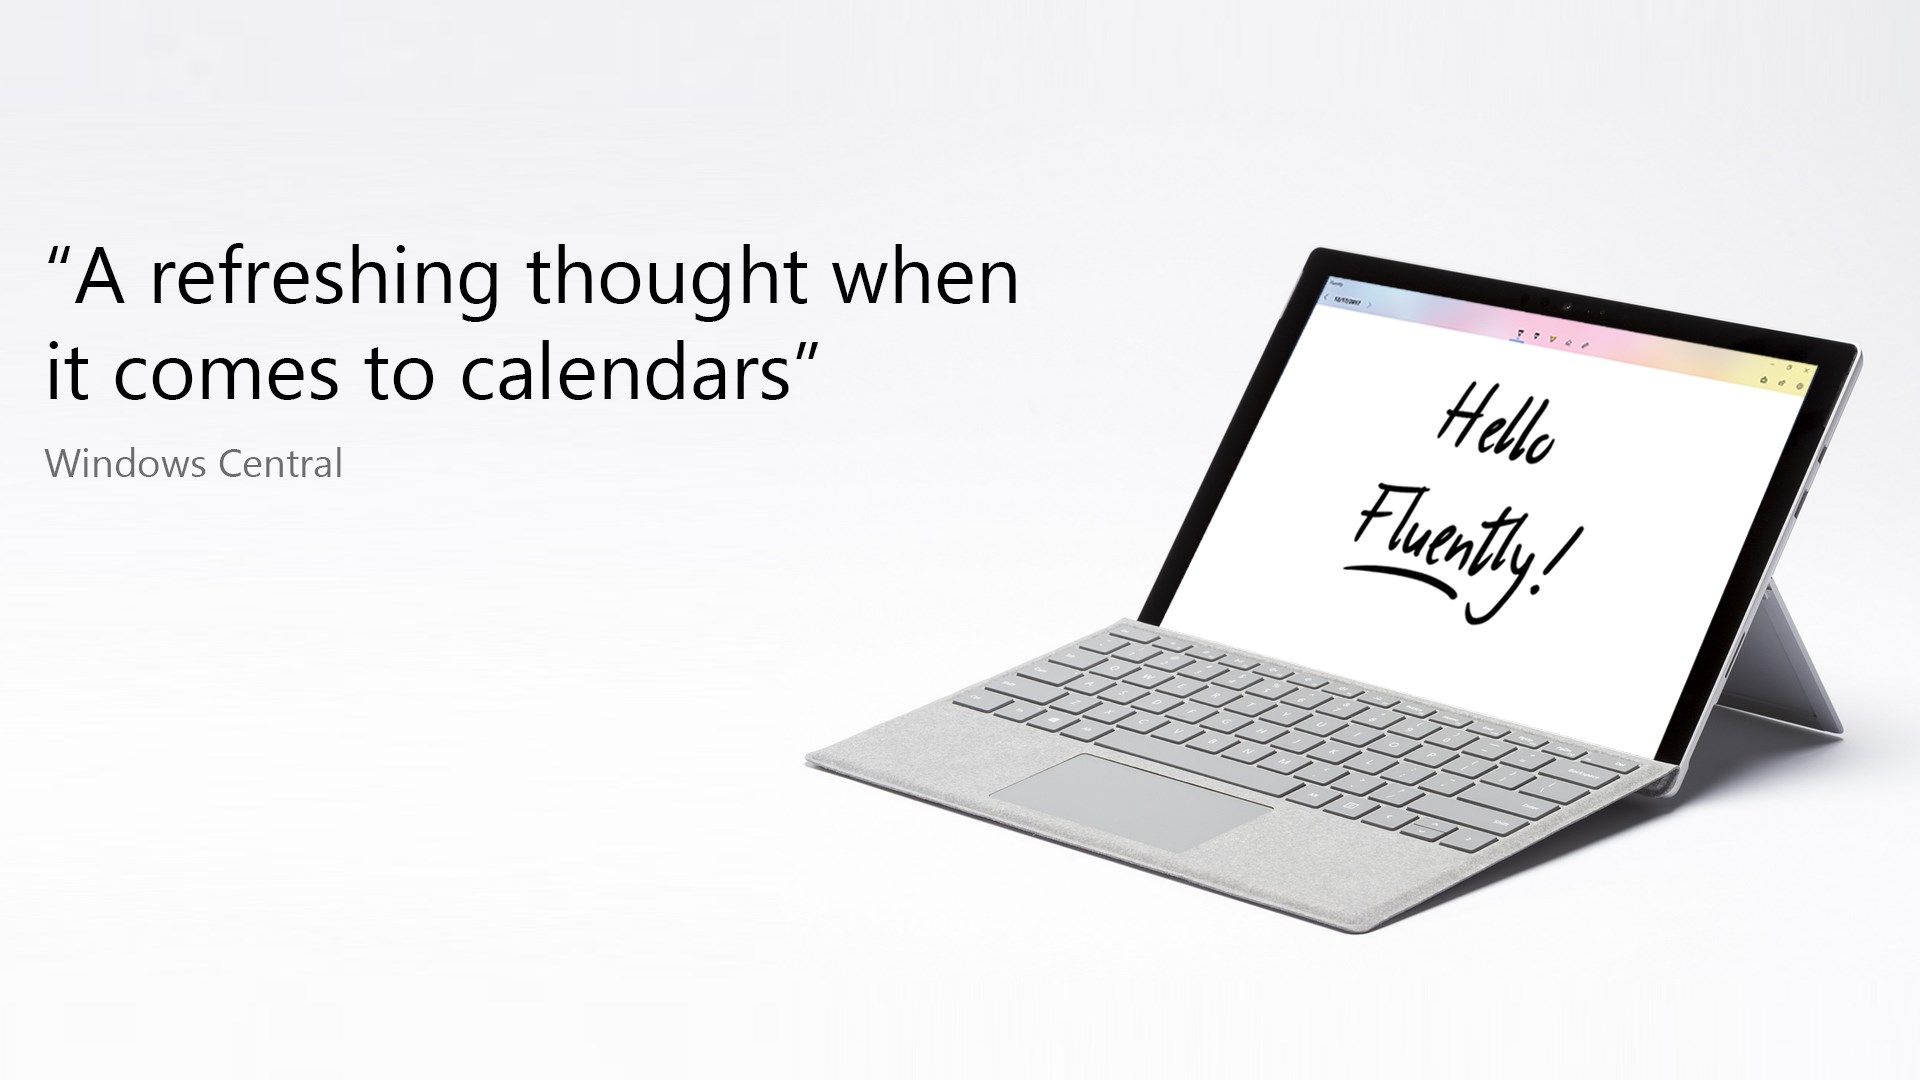 "A refreshing thought when it comes to calendars" - Windows Central